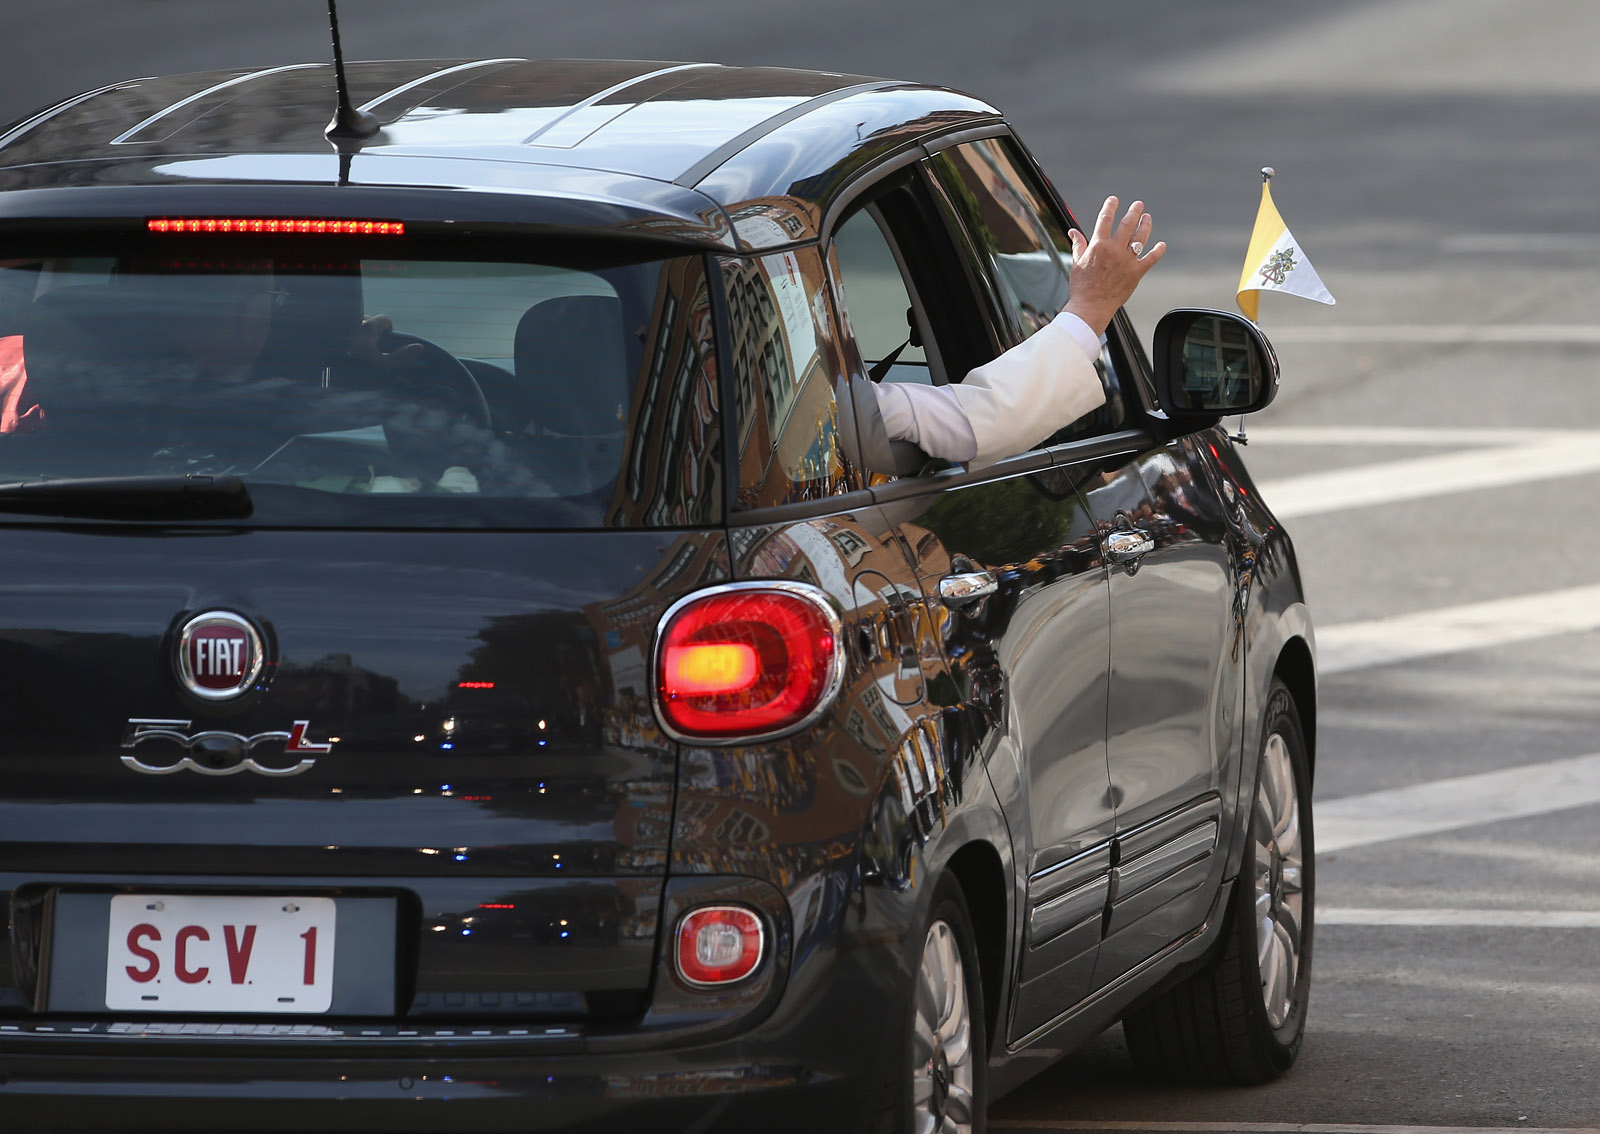 NEW YORK, NY - SEPTEMBER 25:  Pope Francis arrives in his Fiat to the Lady Queen of Angels school on September 25, 2015 in the Harlem neighborhood of New York City. The Pope visited the inner city Catholic school in east Harlem and met with children, immigrants and Catholic Charities workers on the second day of his visit to New York City.  (Photo by John Moore/Getty Images)